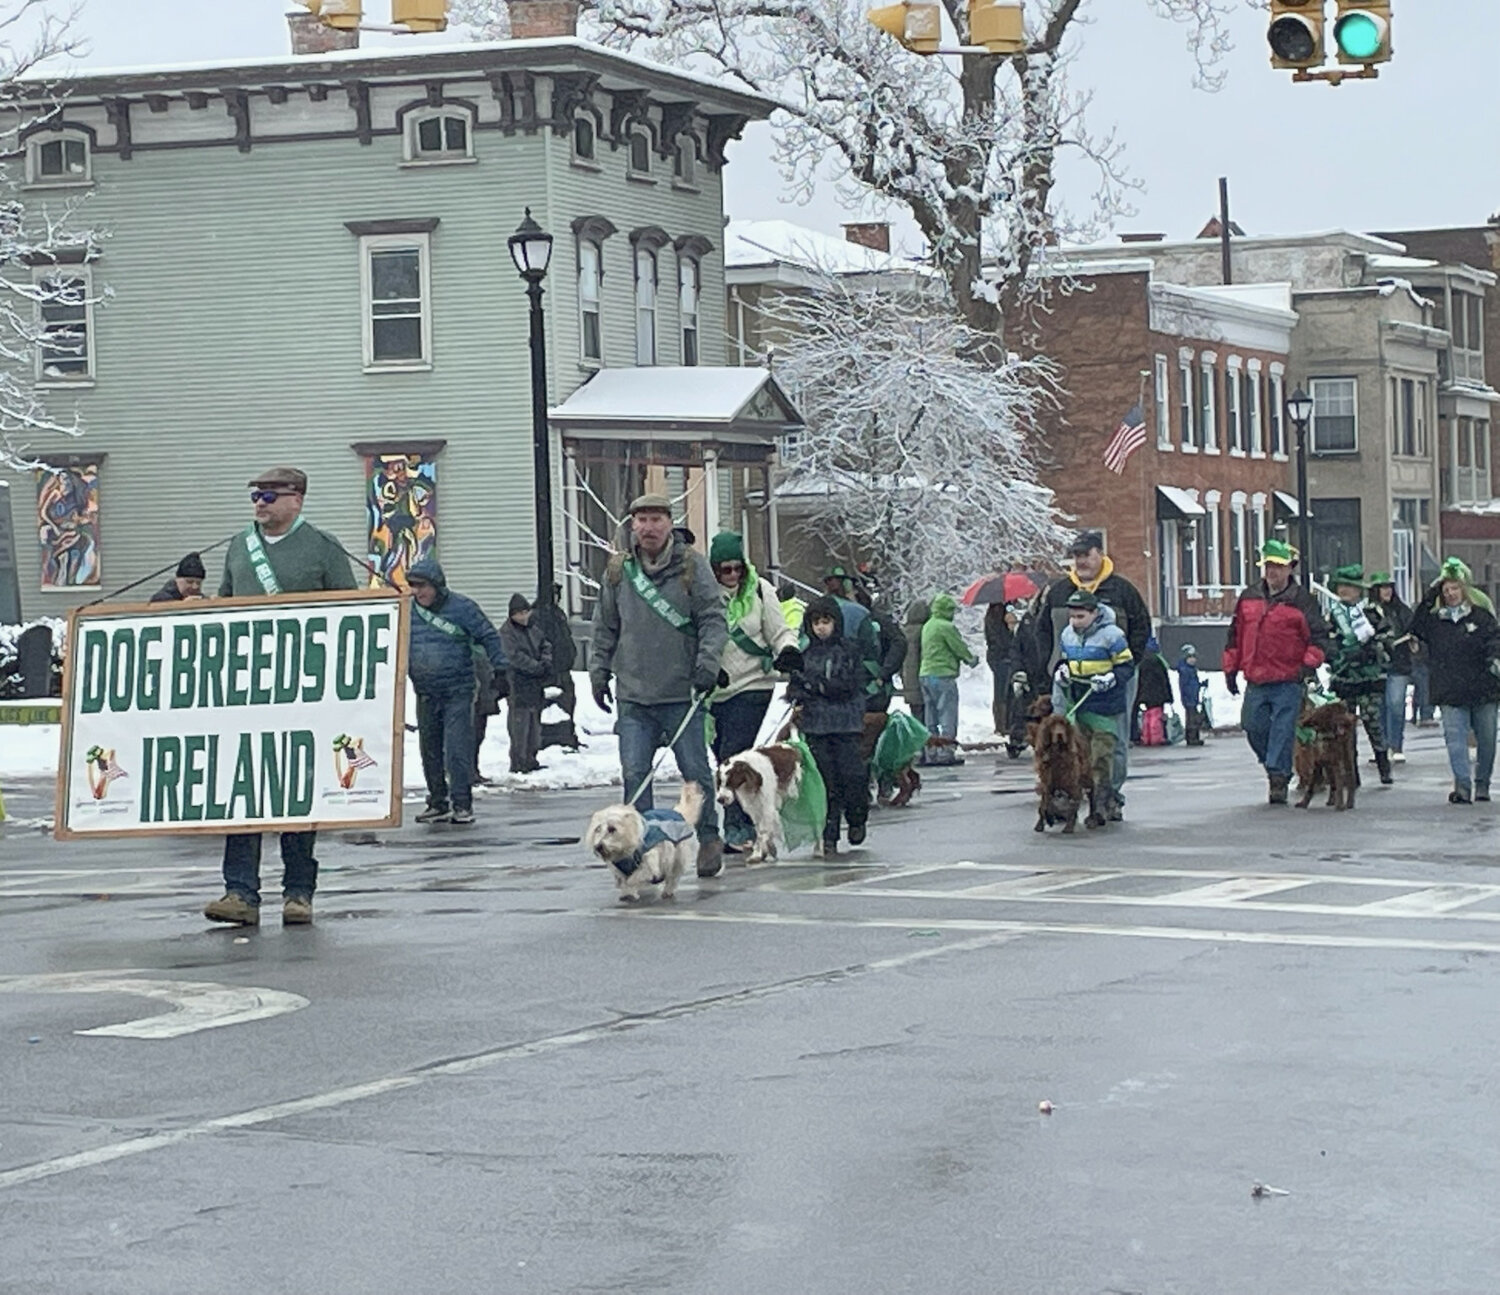 The group from Dog Breeds of Ireland make their way down Genesee Street with their canine companions during Saturday's St. Patrick[s Day Parade.